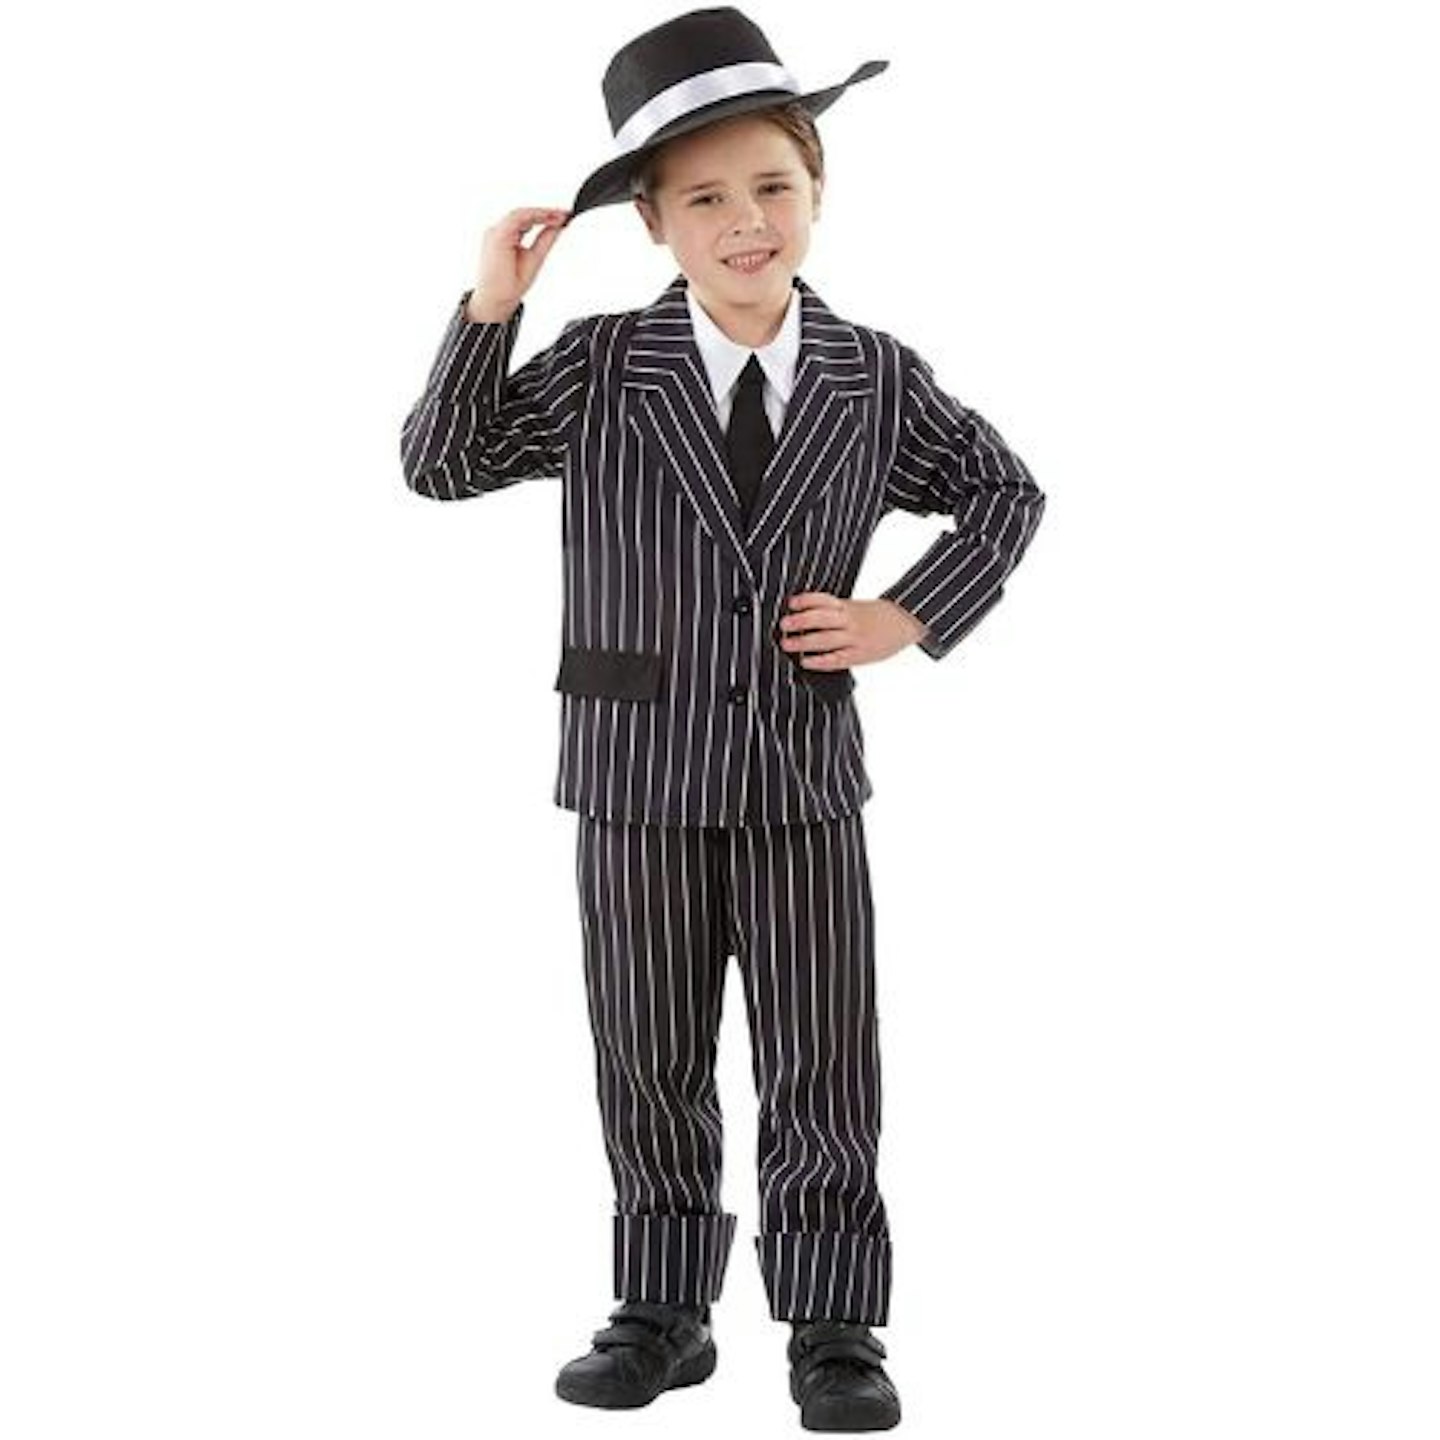 Fun Shack Gangster Costume, Family Halloween costumes